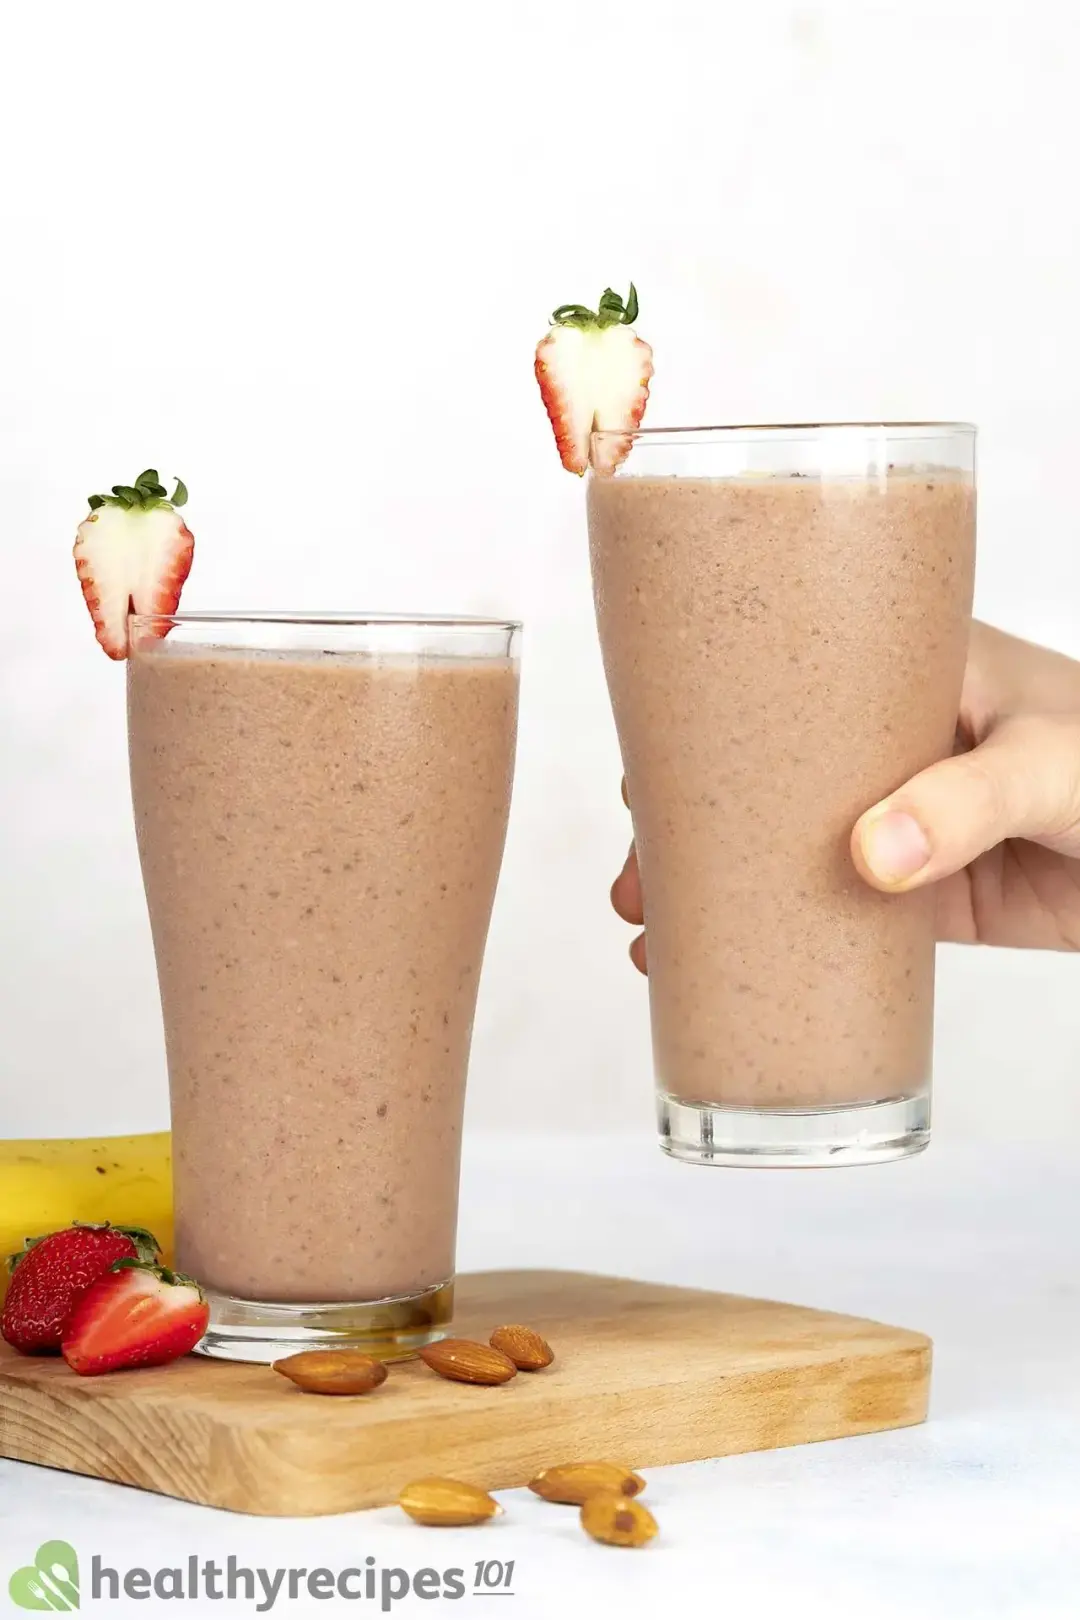 How Long Does Chocolate Strawberry Smoothie Last